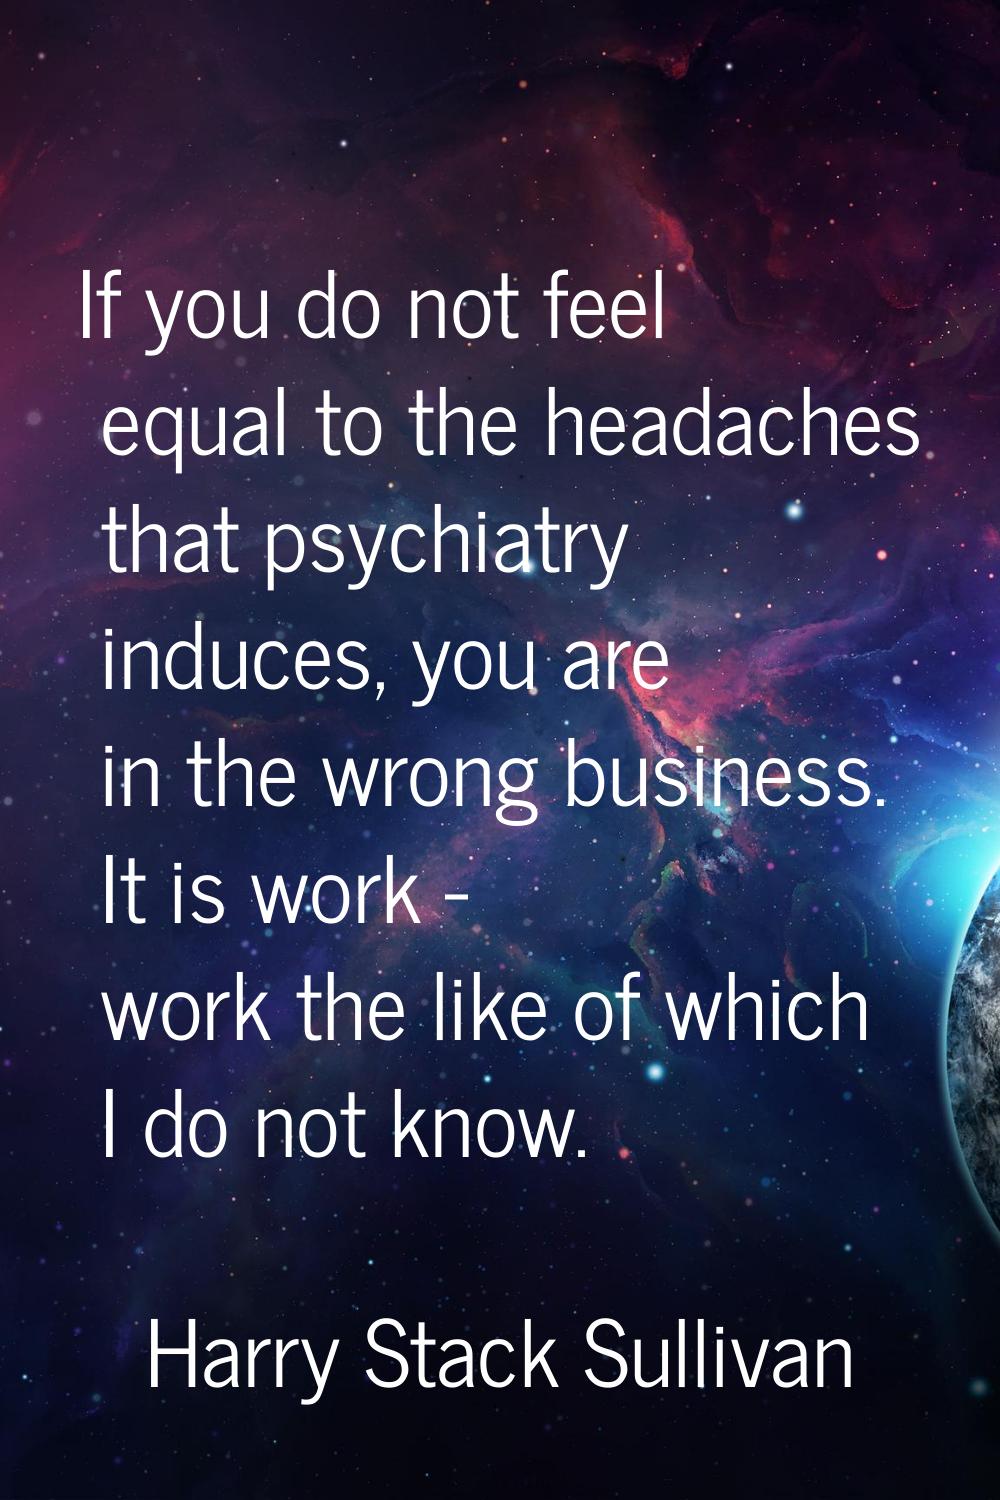 If you do not feel equal to the headaches that psychiatry induces, you are in the wrong business. I